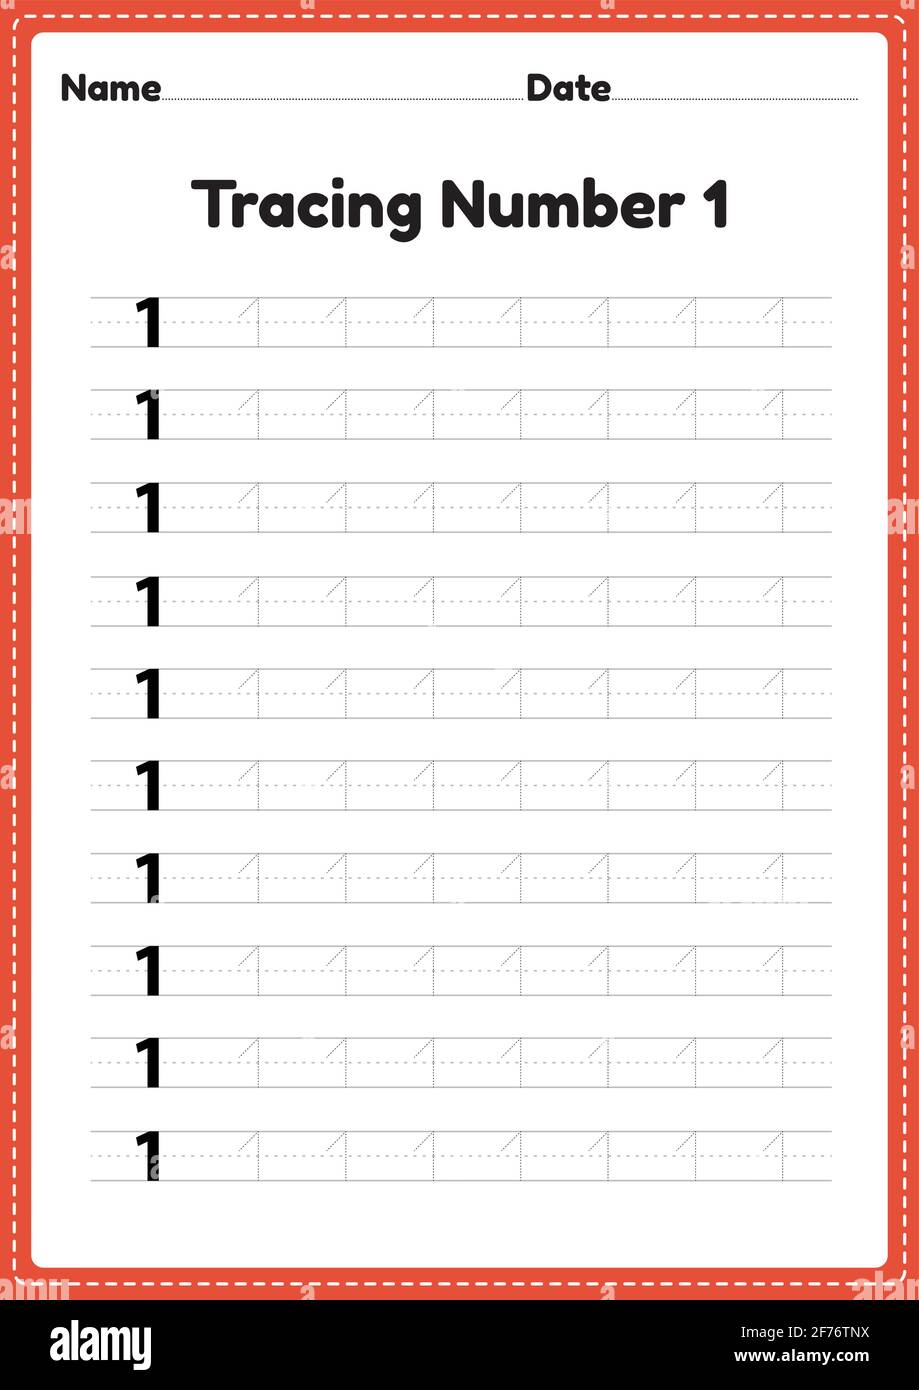 Tracing number 1 worksheet for kindergarten and preschool kids for educational handwriting practice in a printable page. Stock Vector